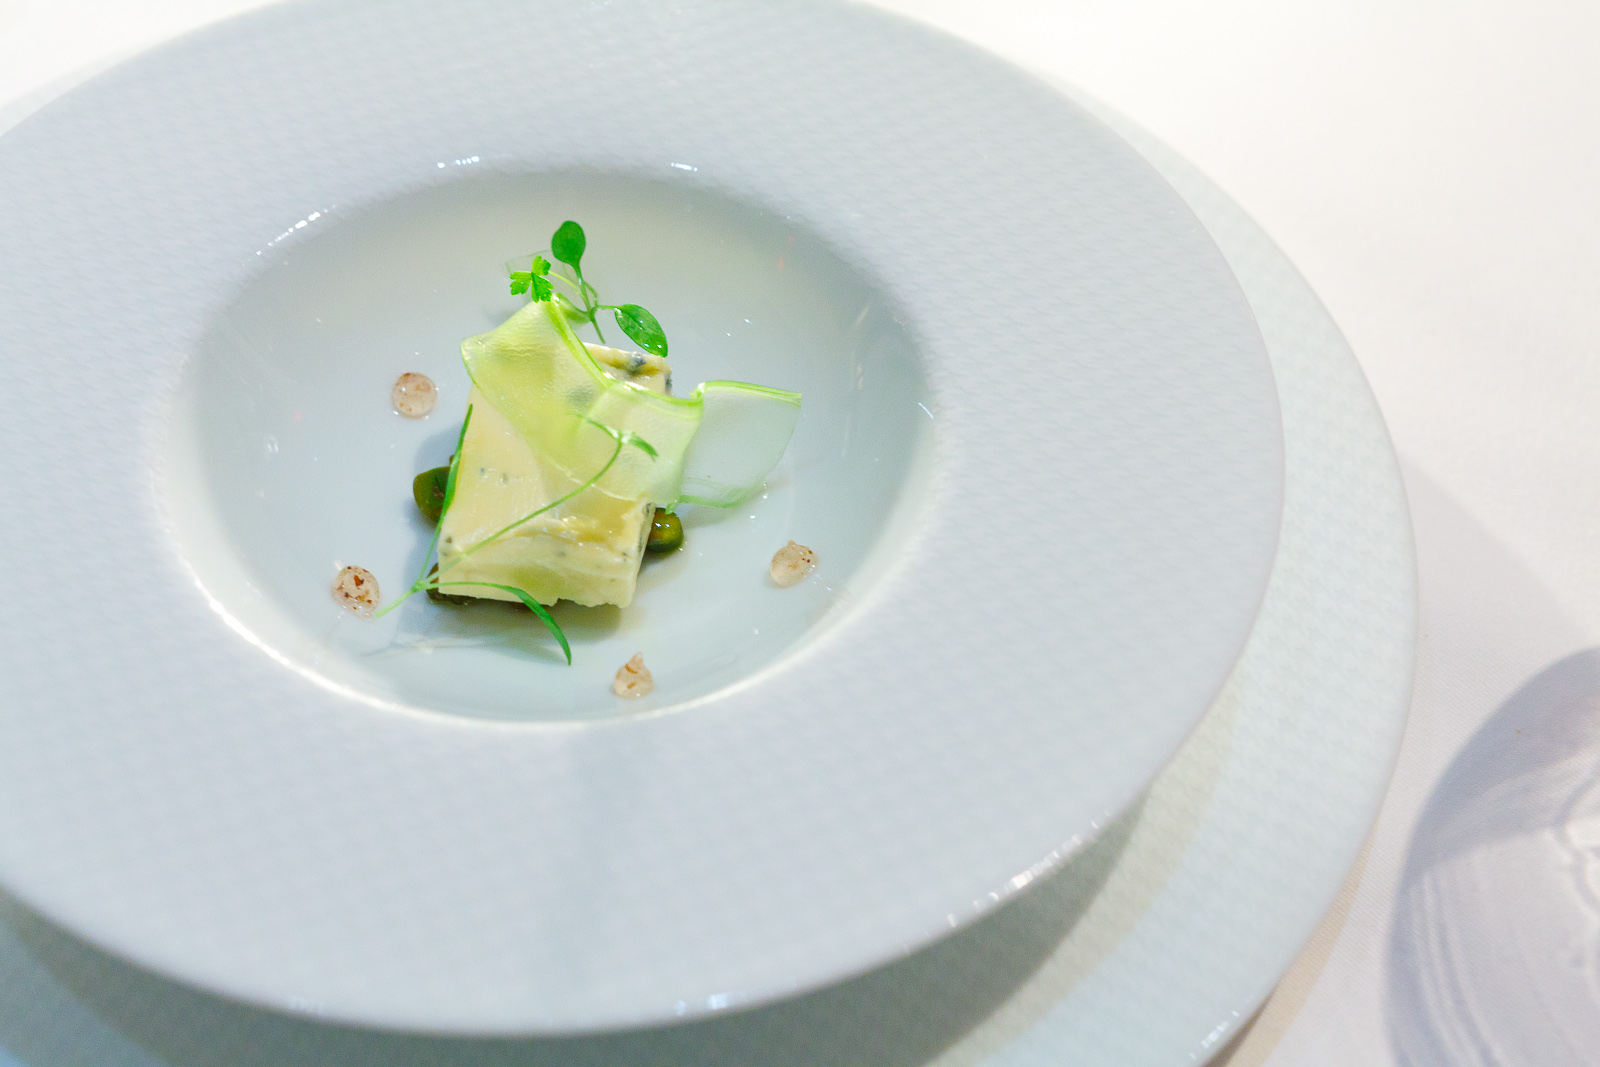 17th Course: "Bavarian blue," toasted pistachios and petite parsley with Szechuan pepper "aigre-doux"